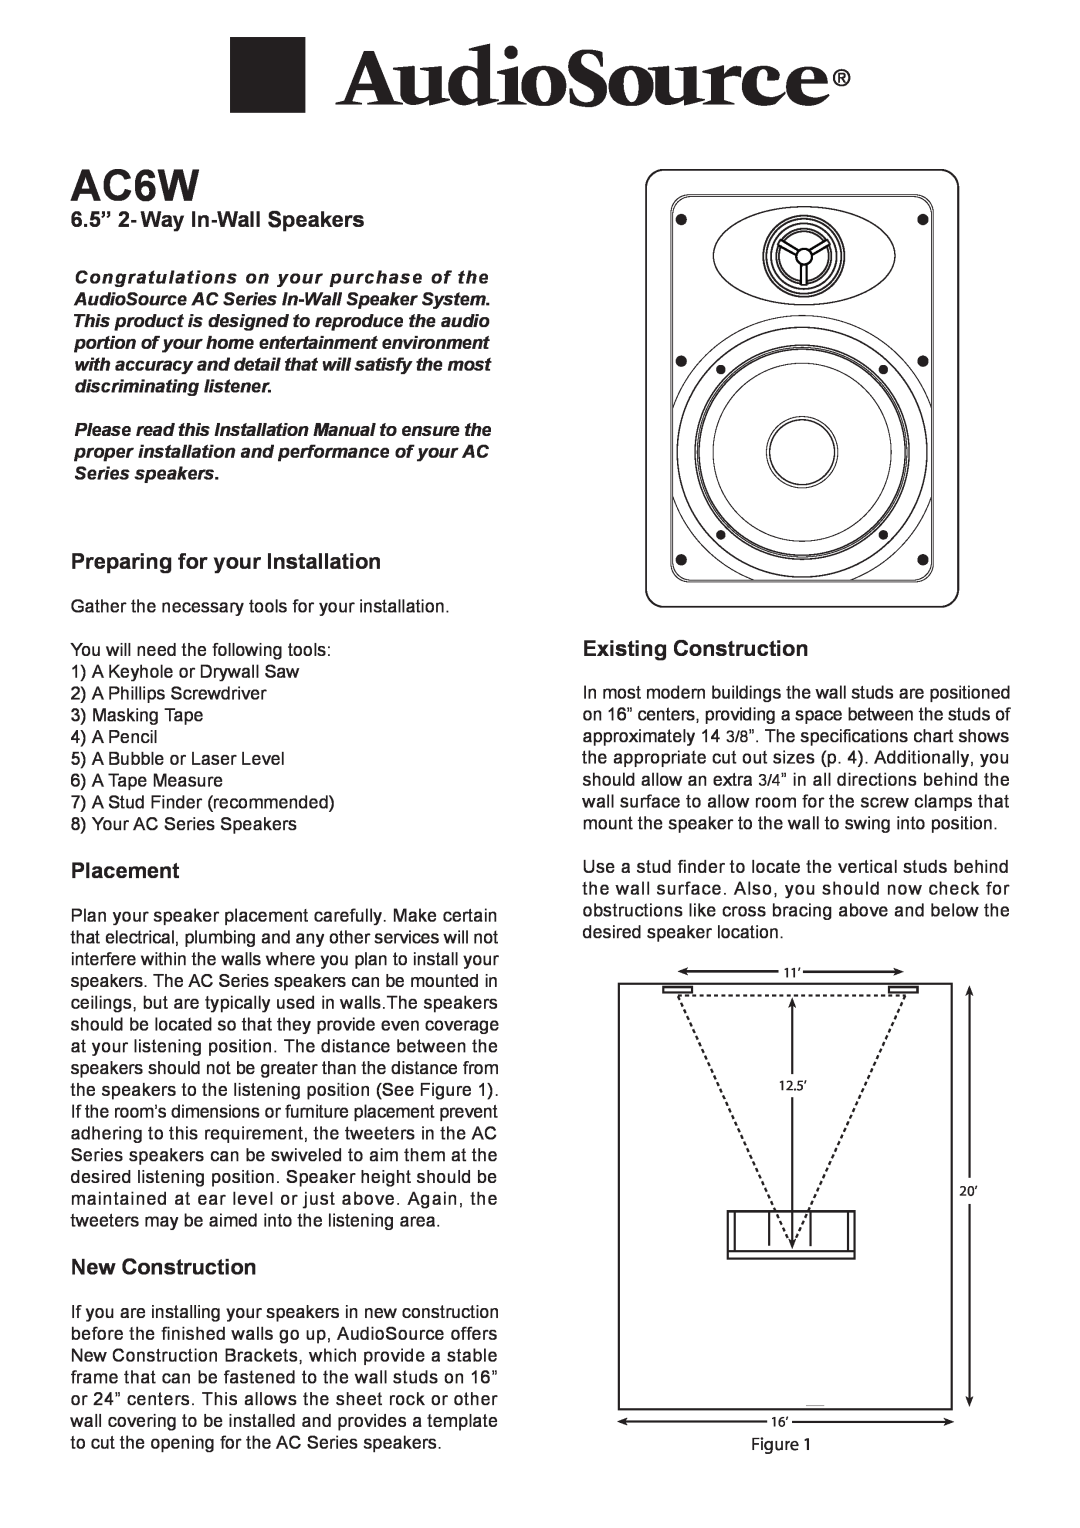 AudioSource AC6W installation manual 6.5” 2- Way In-WallSpeakers, Preparing for your Installation, Placement 